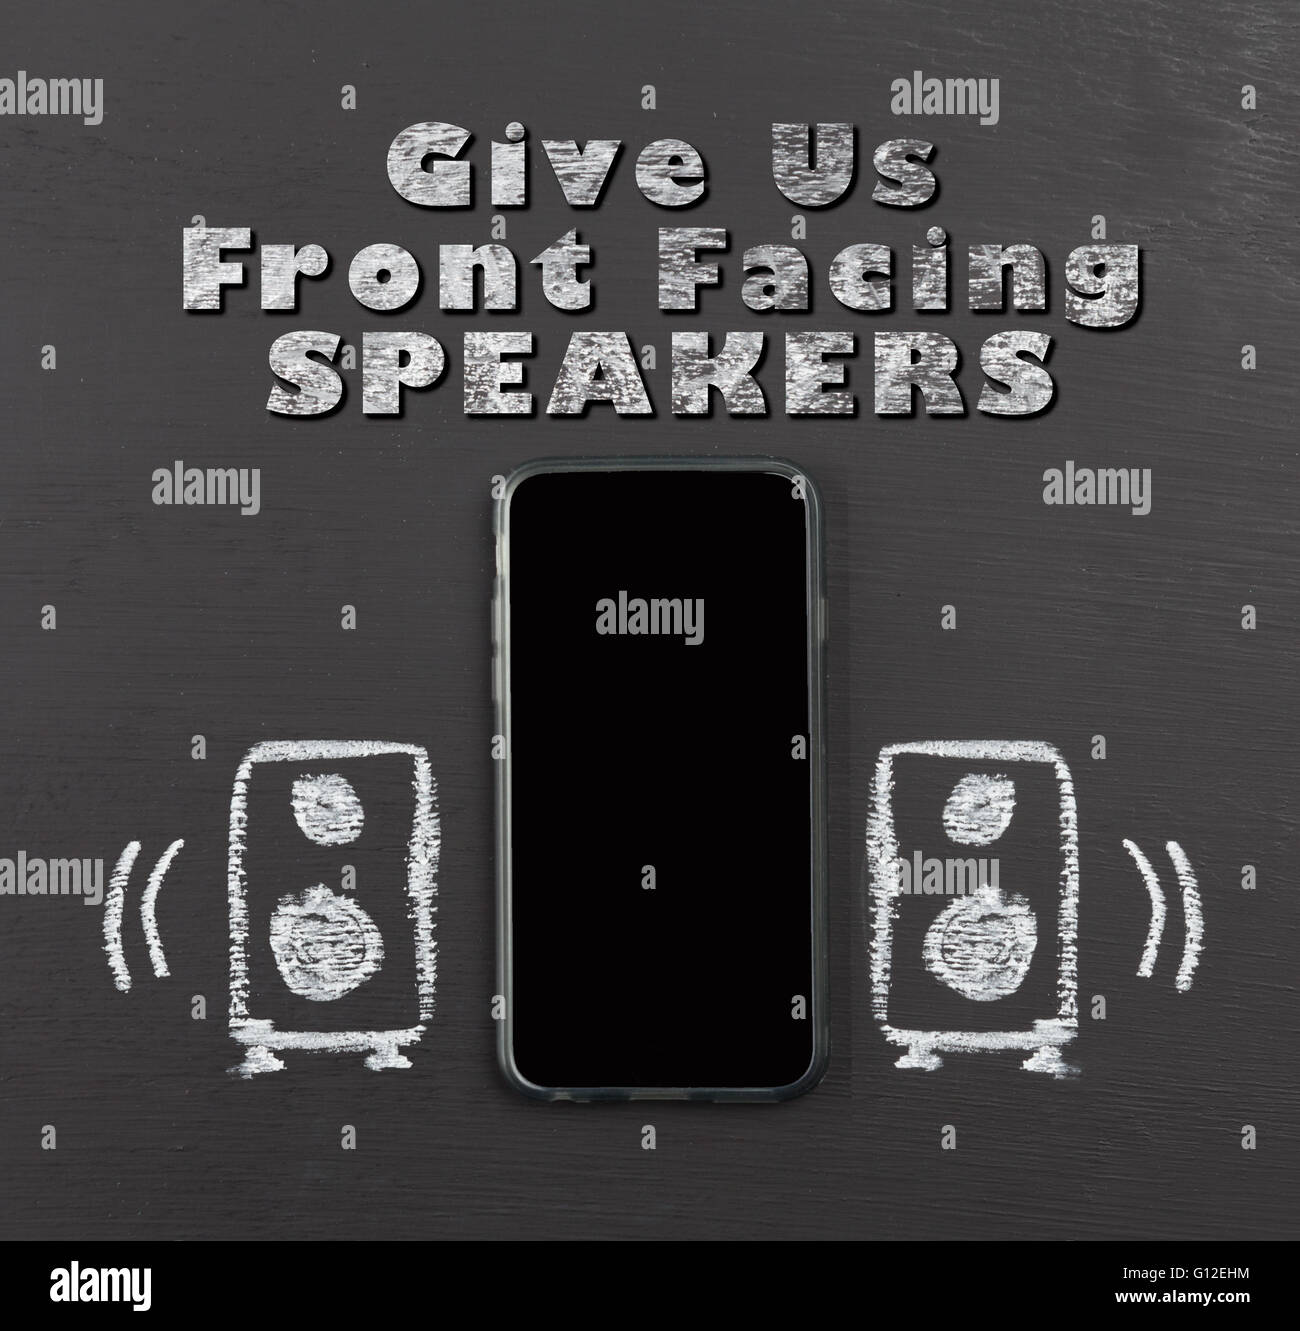 Front facing speakers on mobile phone concept hand drawn with chalk on blackboard with text. Stock Photo